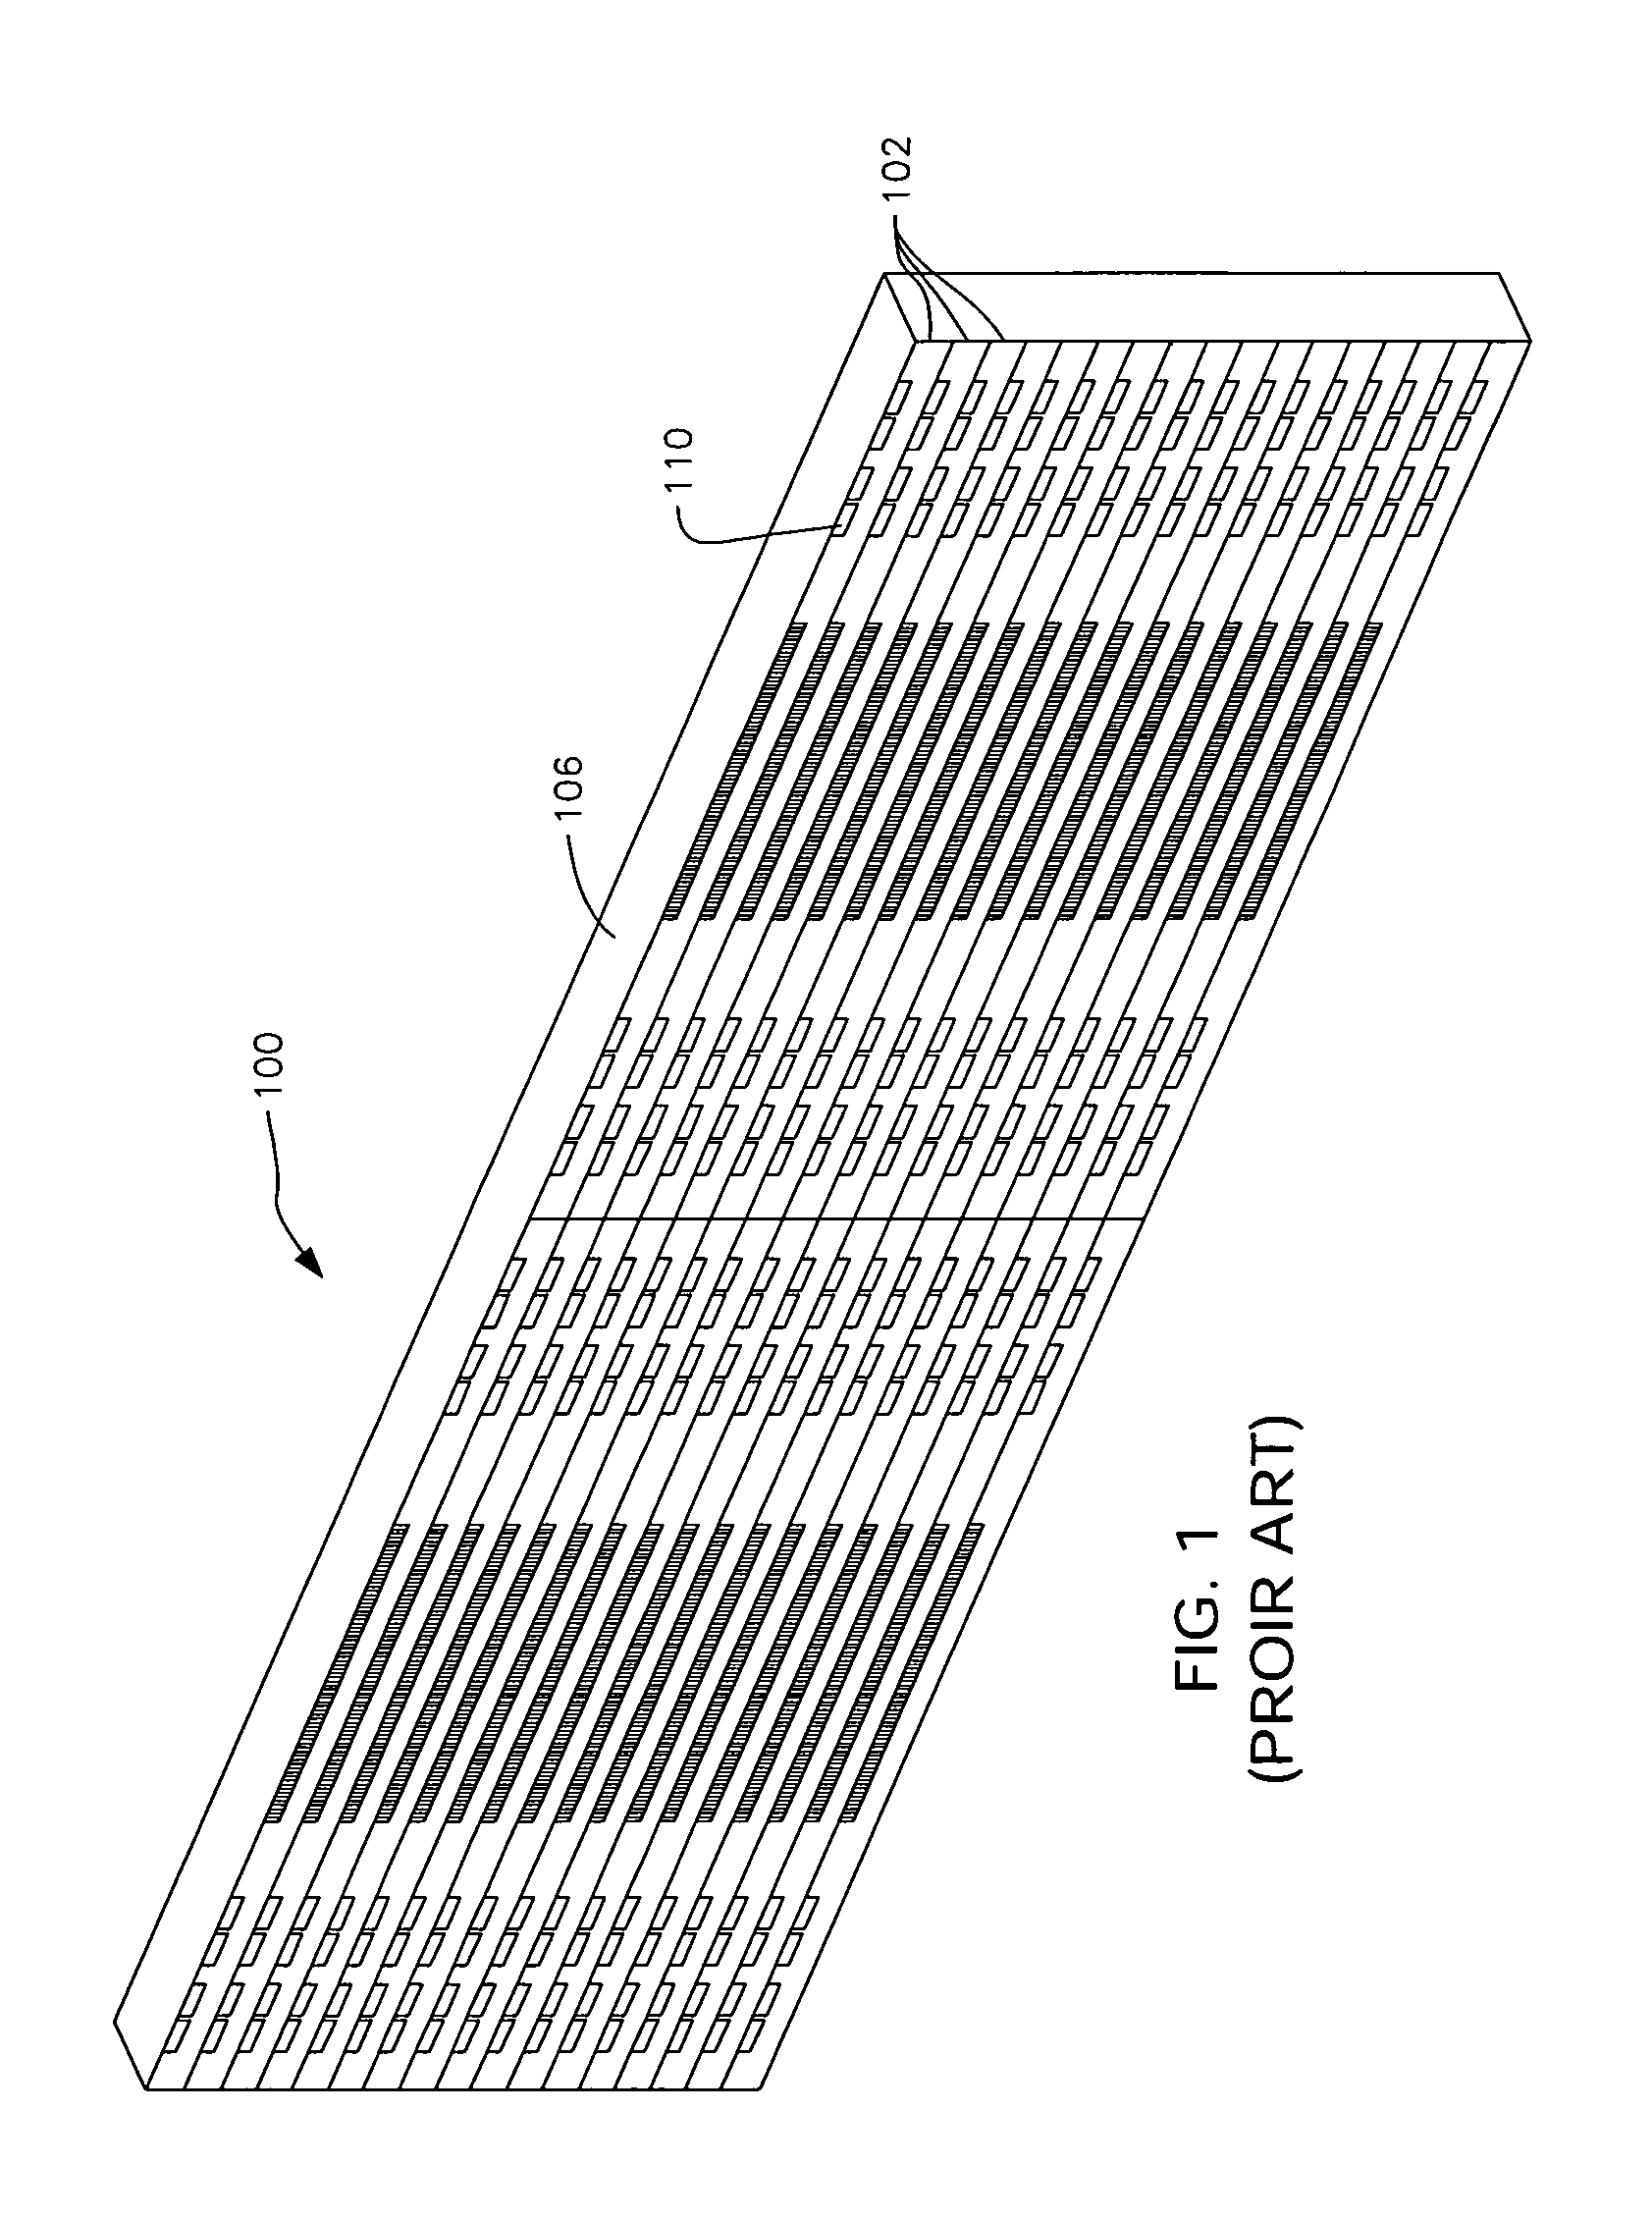 Apparatus including pin adapter for air bearing surface (ABS) lapping